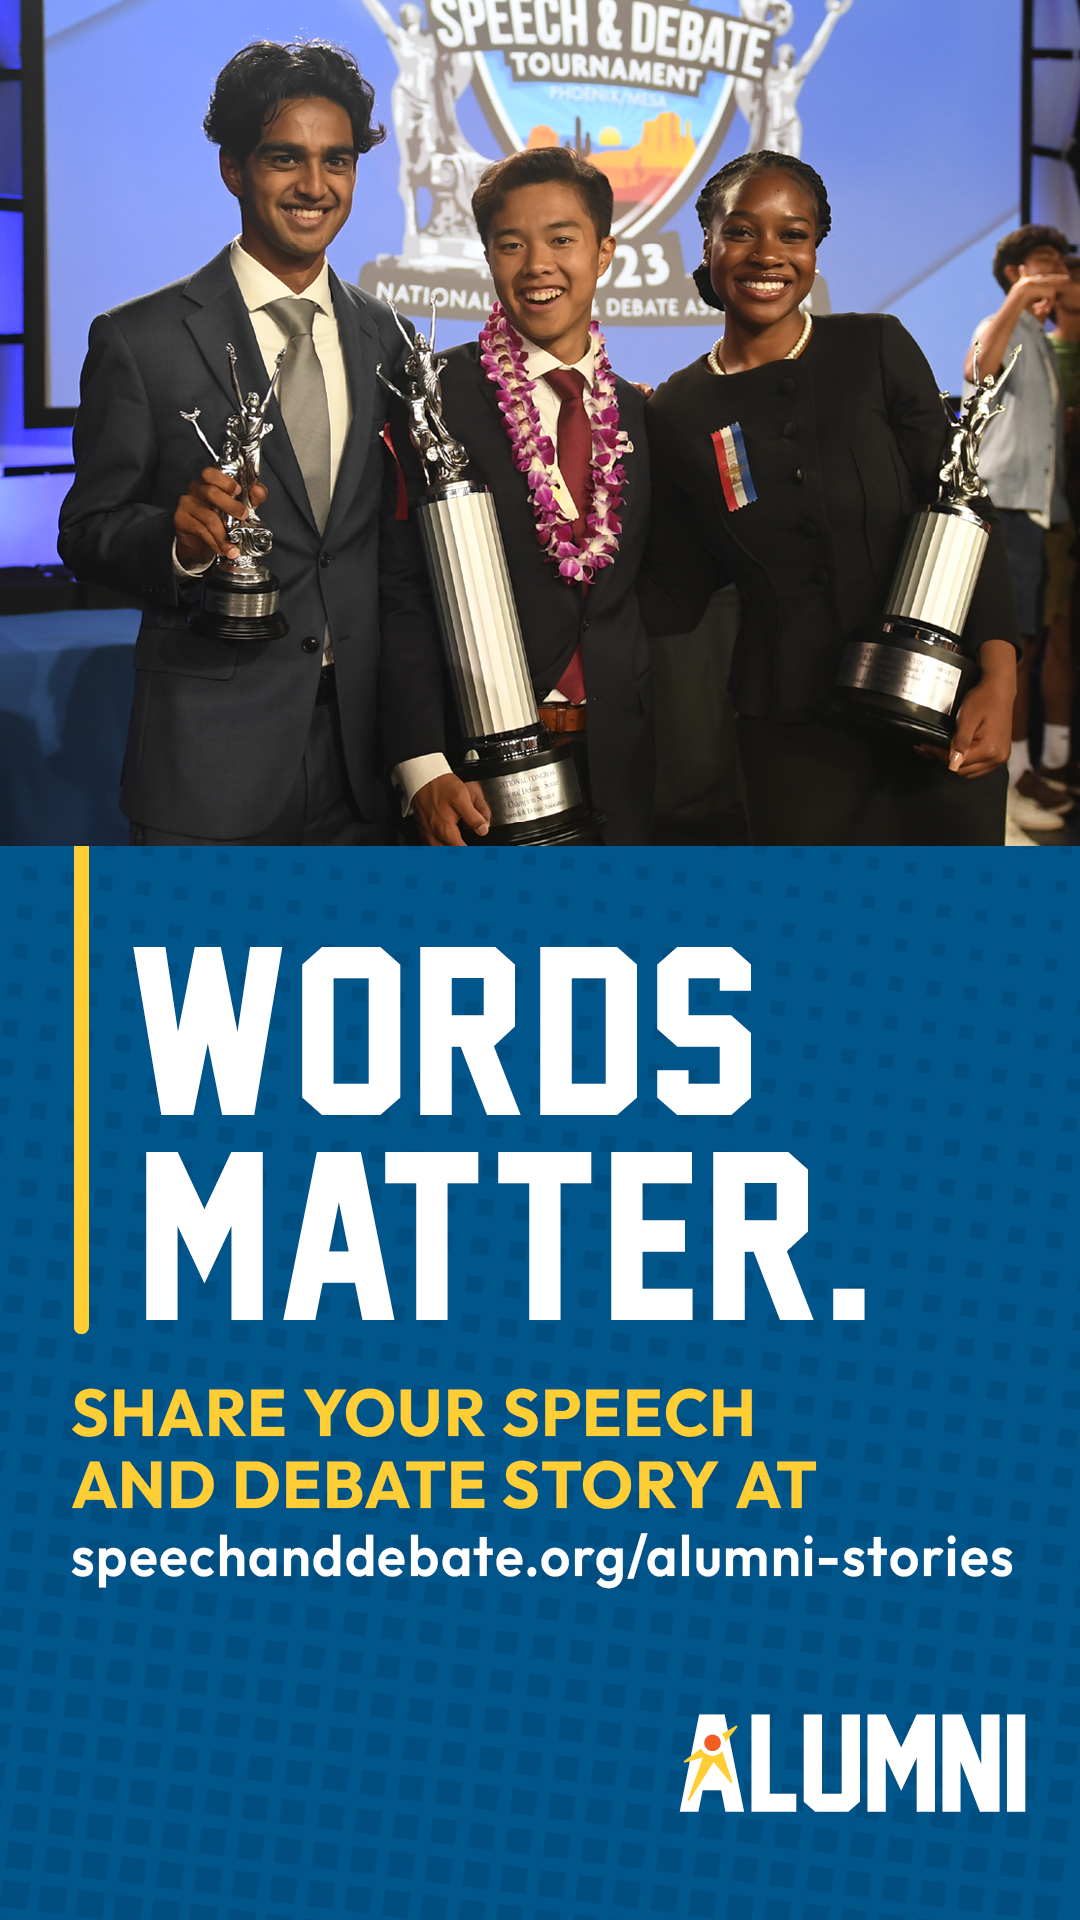 Words Matter. Share Your Speech And Debate Story.